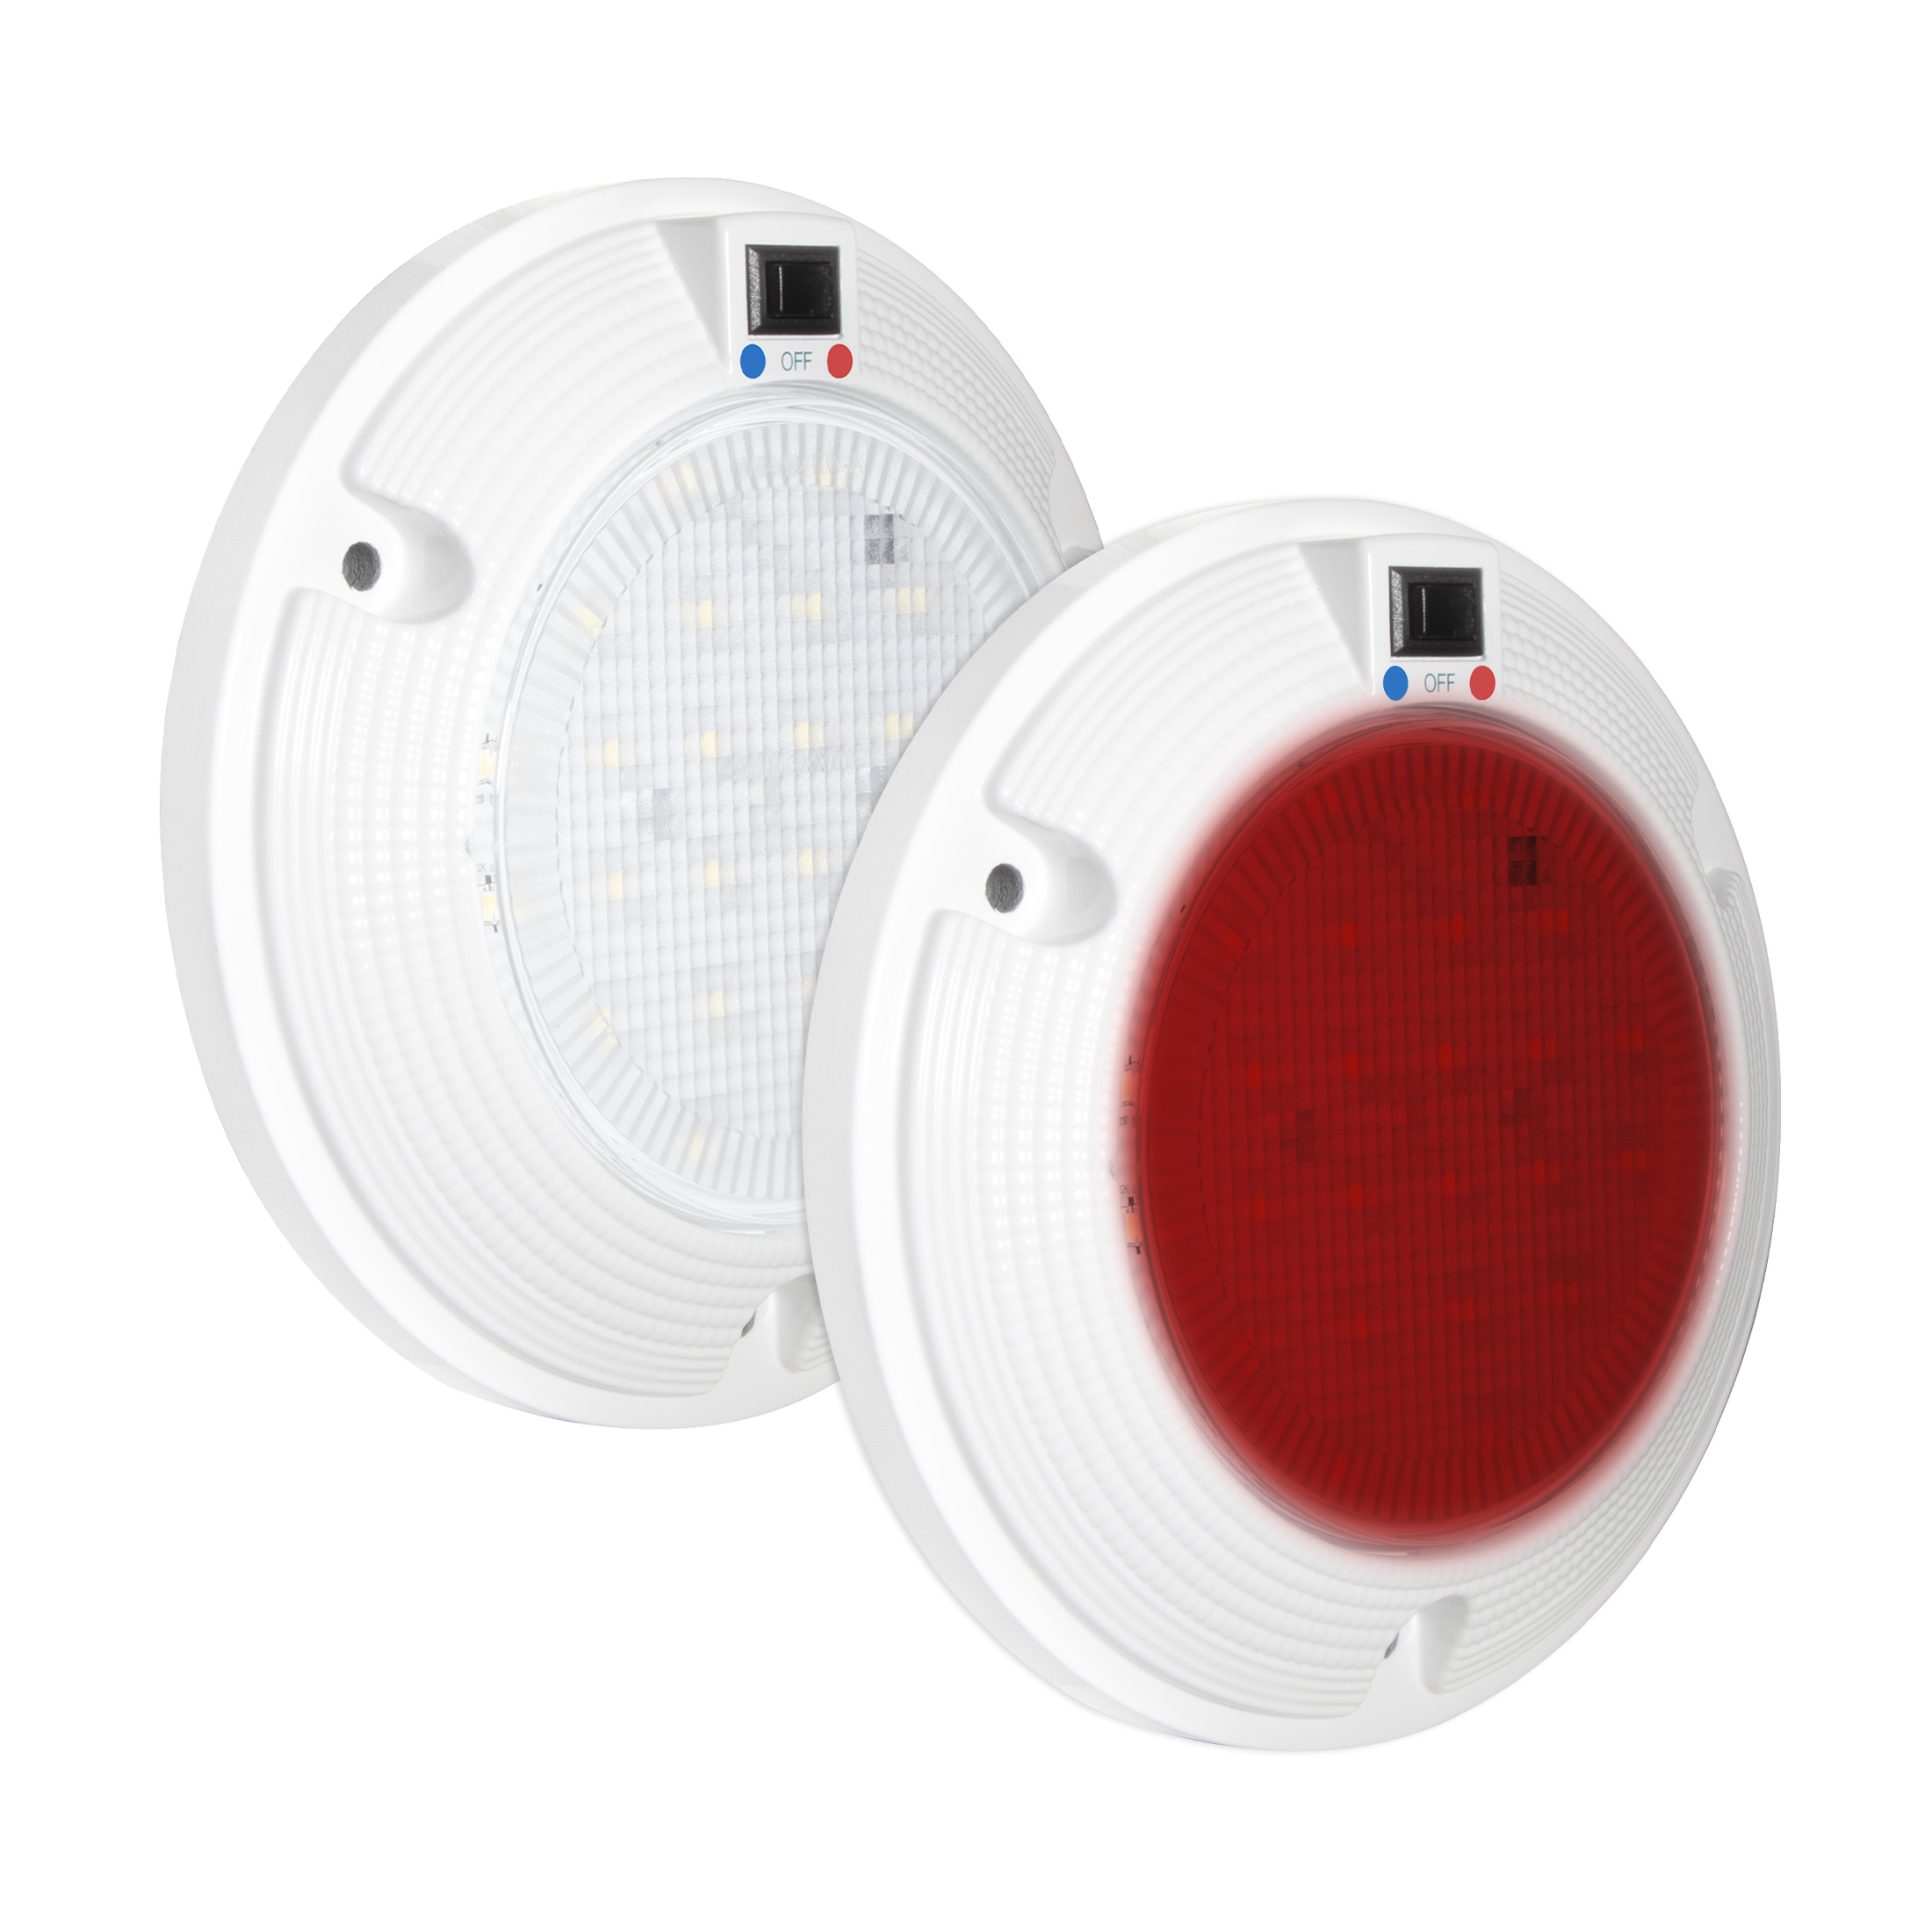 6" Red/White LED Dome Light - 3 Position Switch